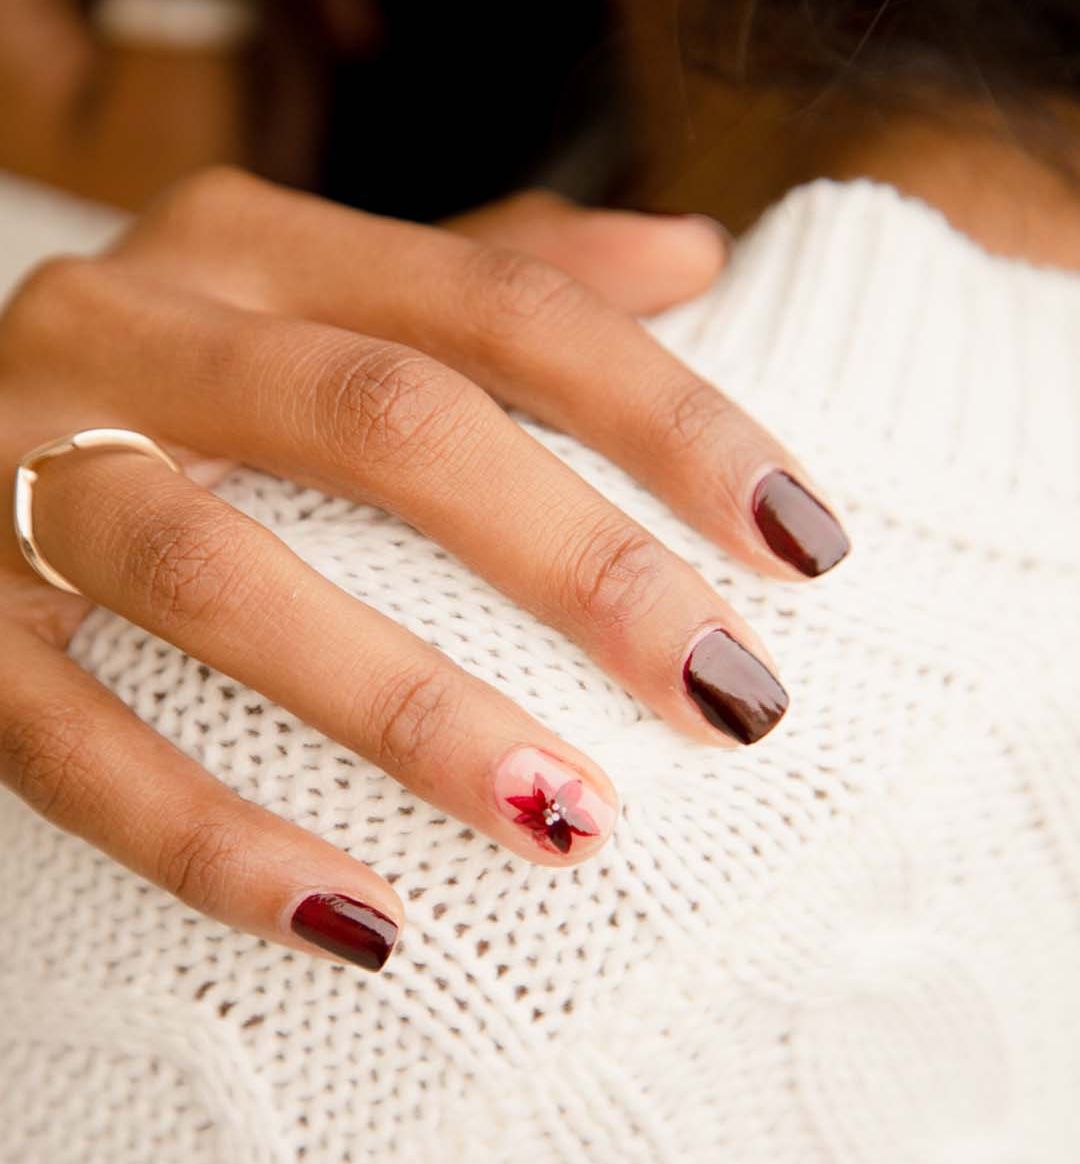 Here is how nail polish can affect your health | OnlyMyHealth